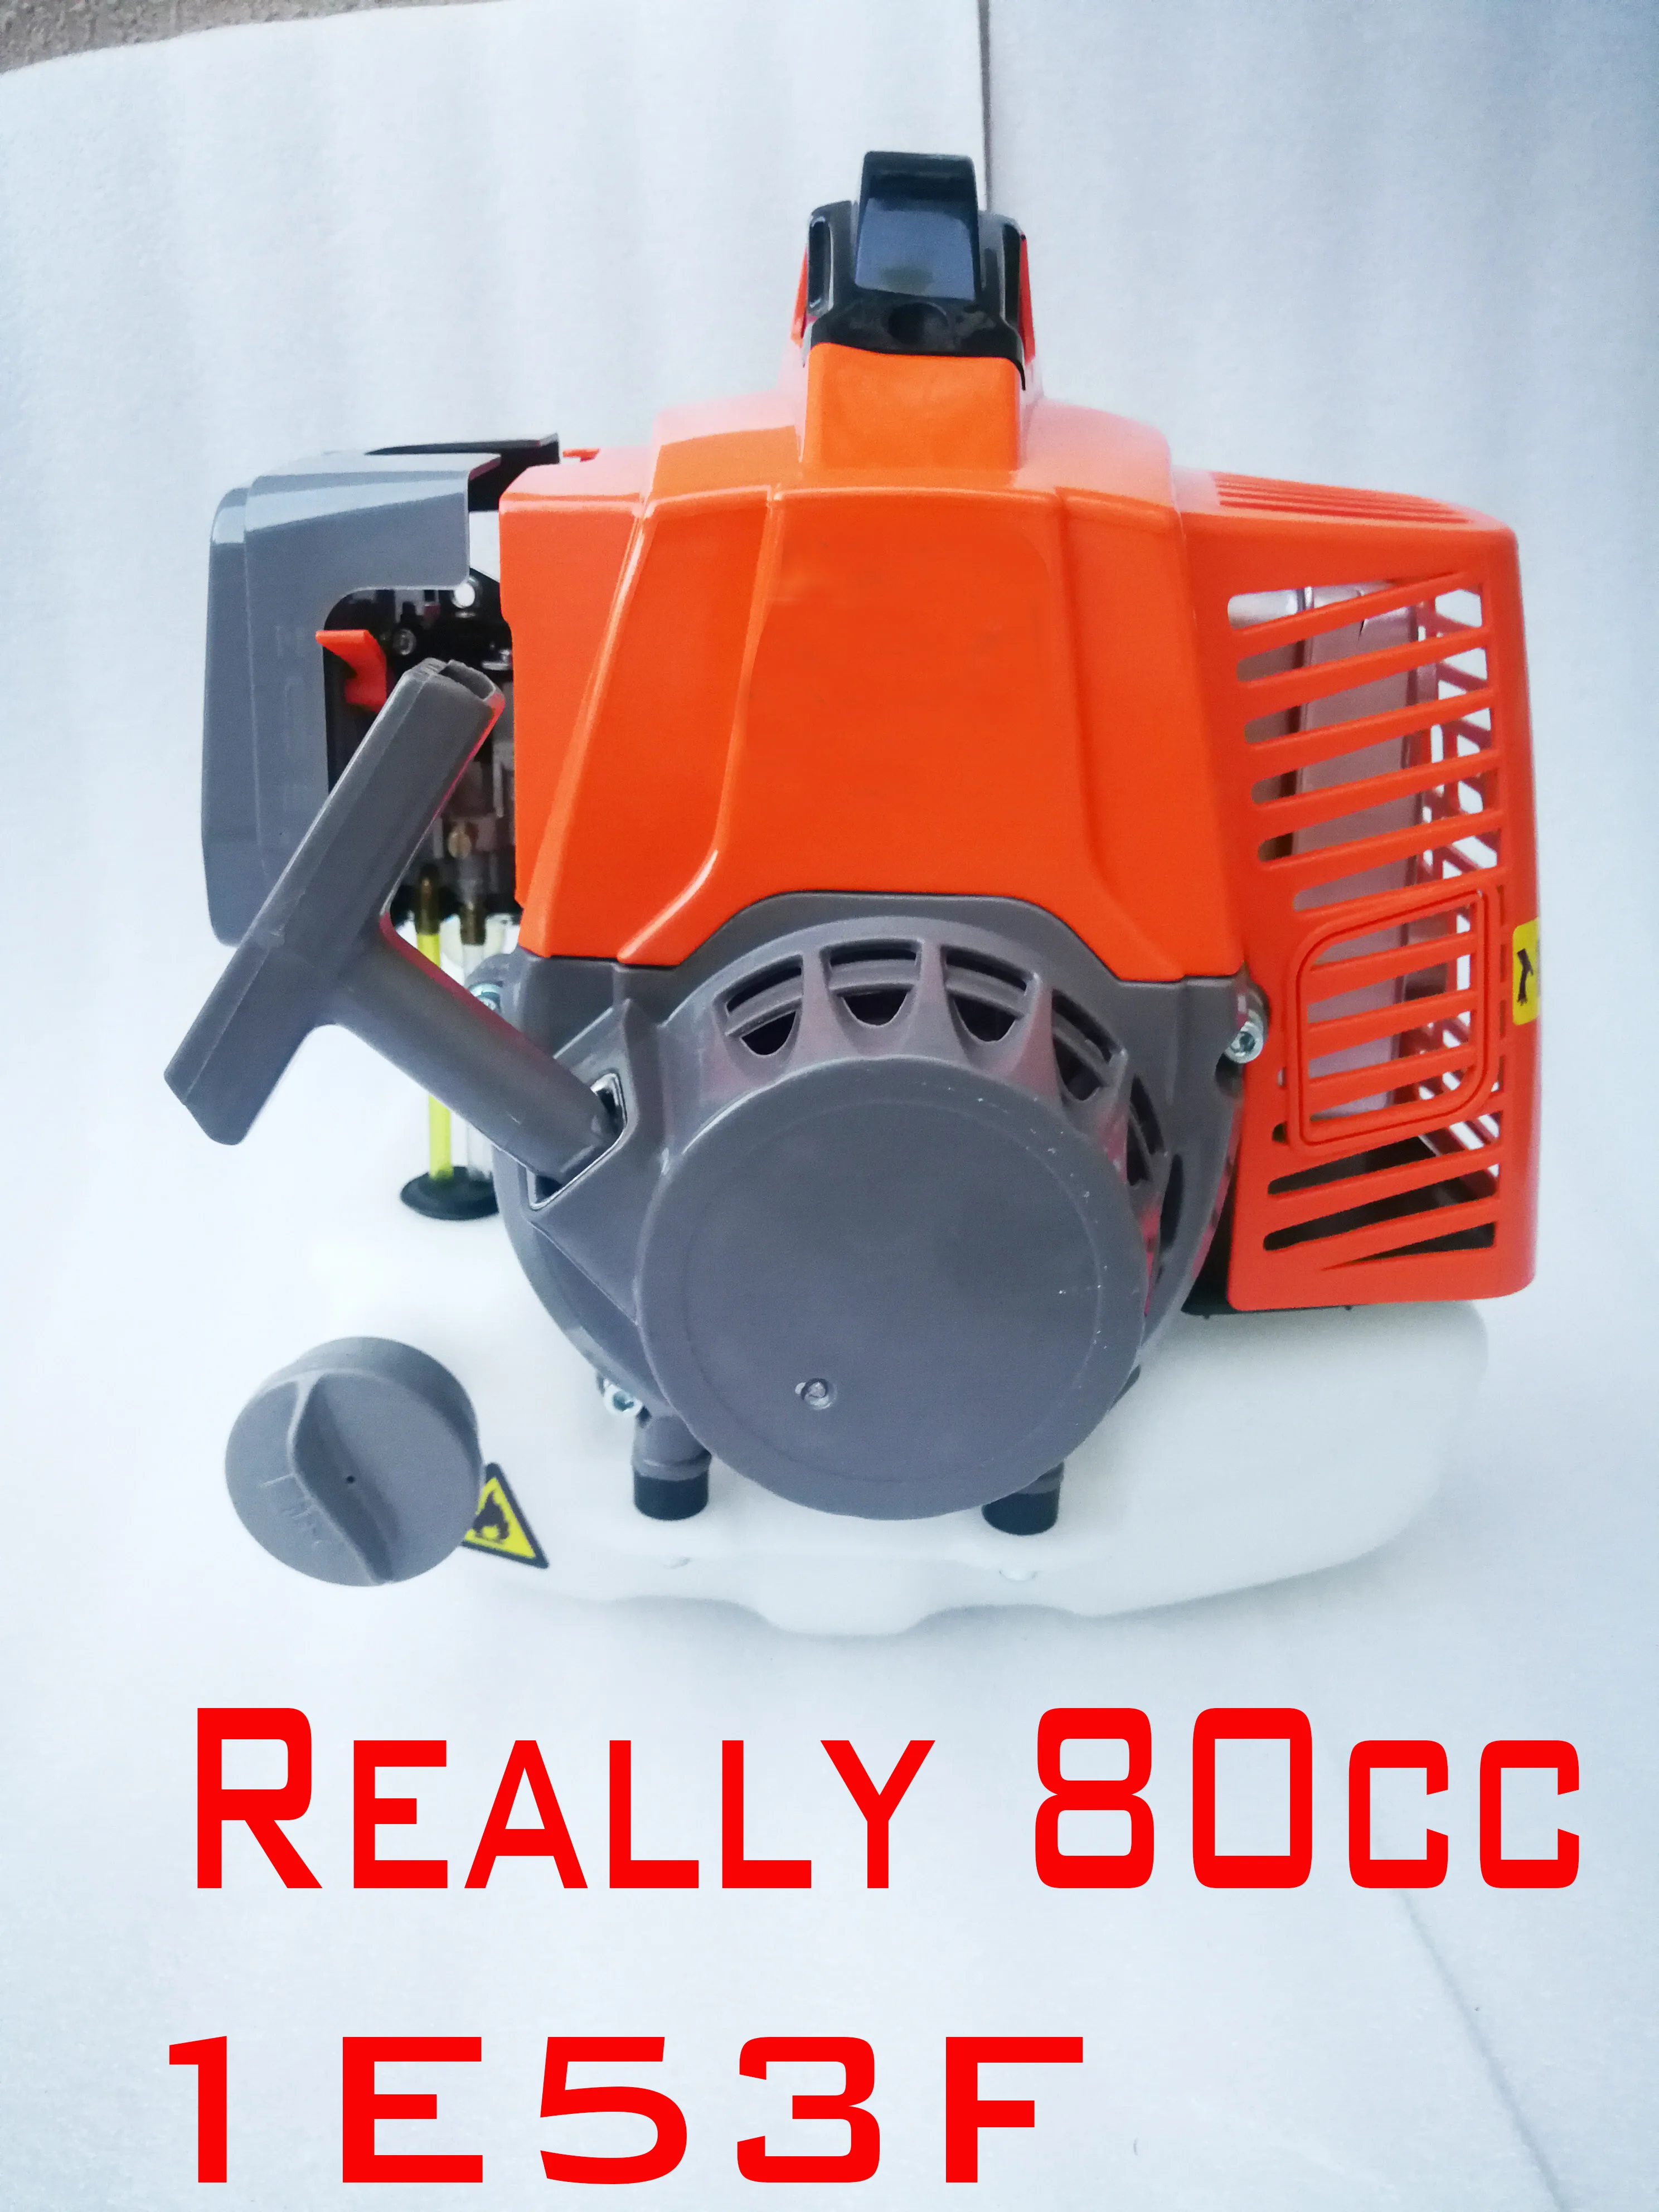 80cc 1E53F 2T Gasoline Engine 2 Stroke For Earth Drill Brush Cutter Grass Trimmer Ground Water Pump Outboard Motor 53mm Big Bore enlarge